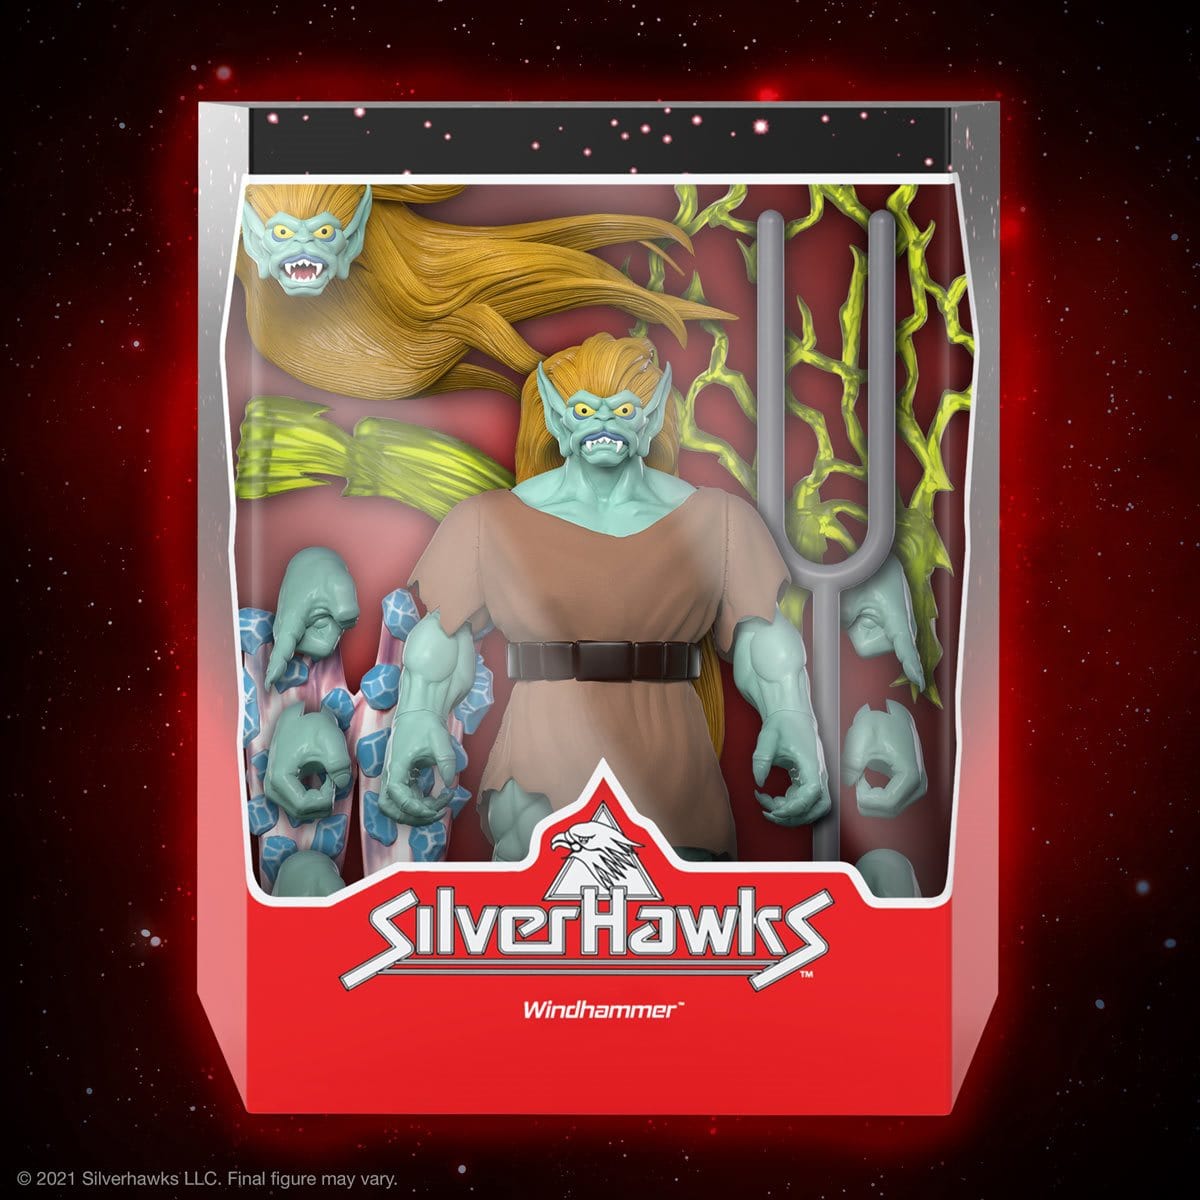 SilverHawks Ultimates Windhammer 7-Inch Action Figure Pop-O-Loco